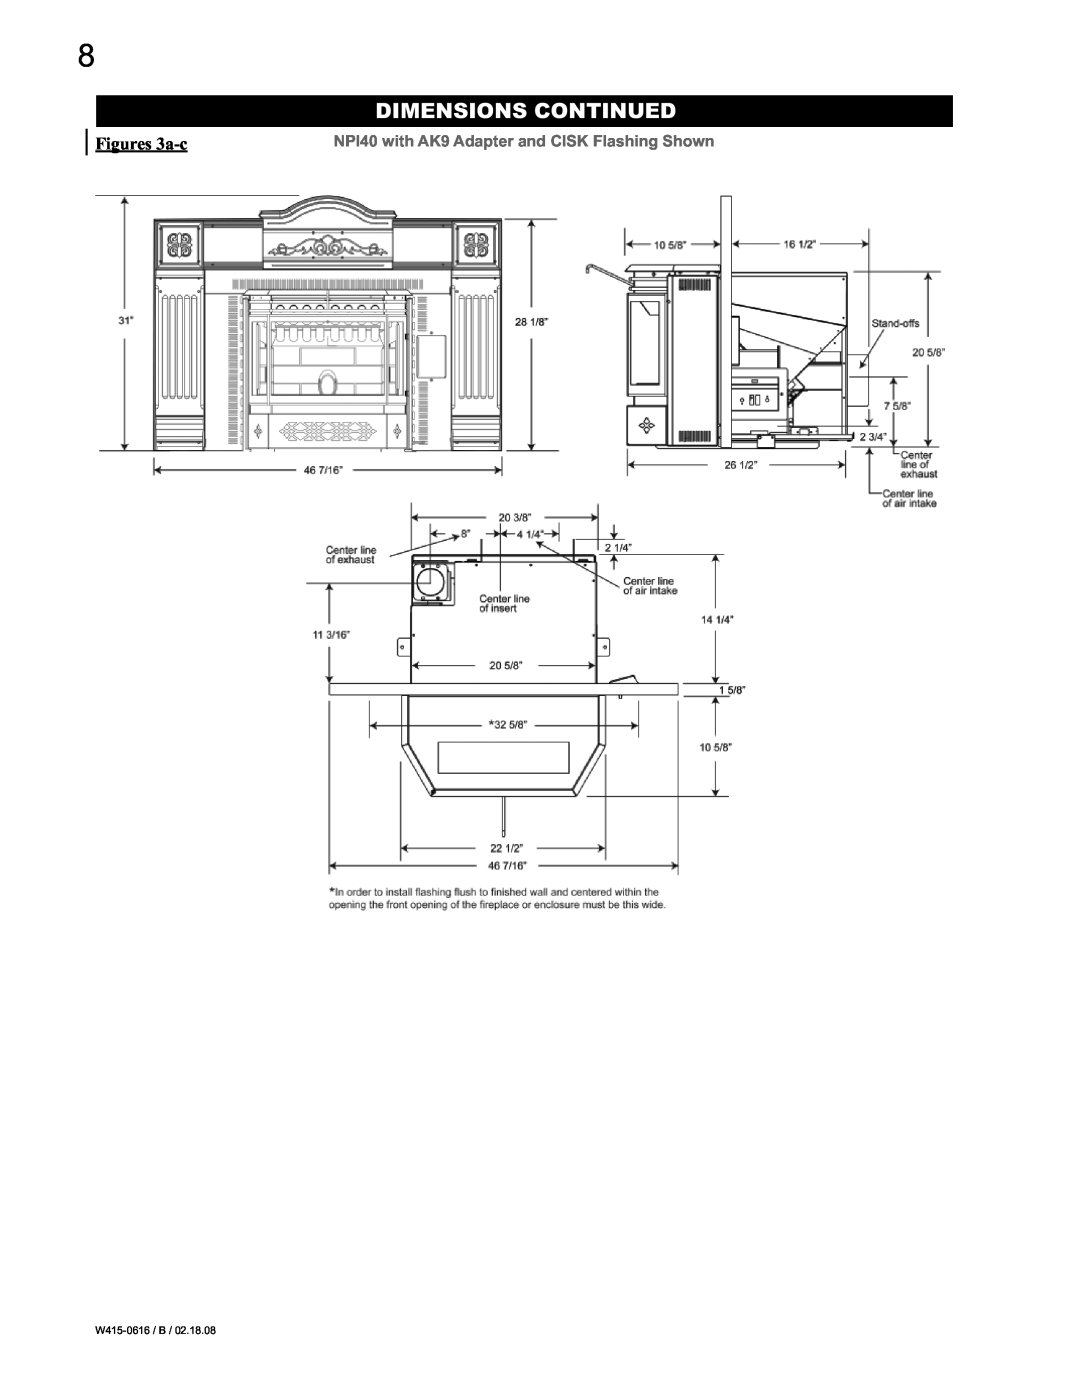 Napoleon Fireplaces Dimensions Continued, Figures 3a-c, NPI40 with AK9 Adapter and CISK Flashing Shown, W415-0616 /B 